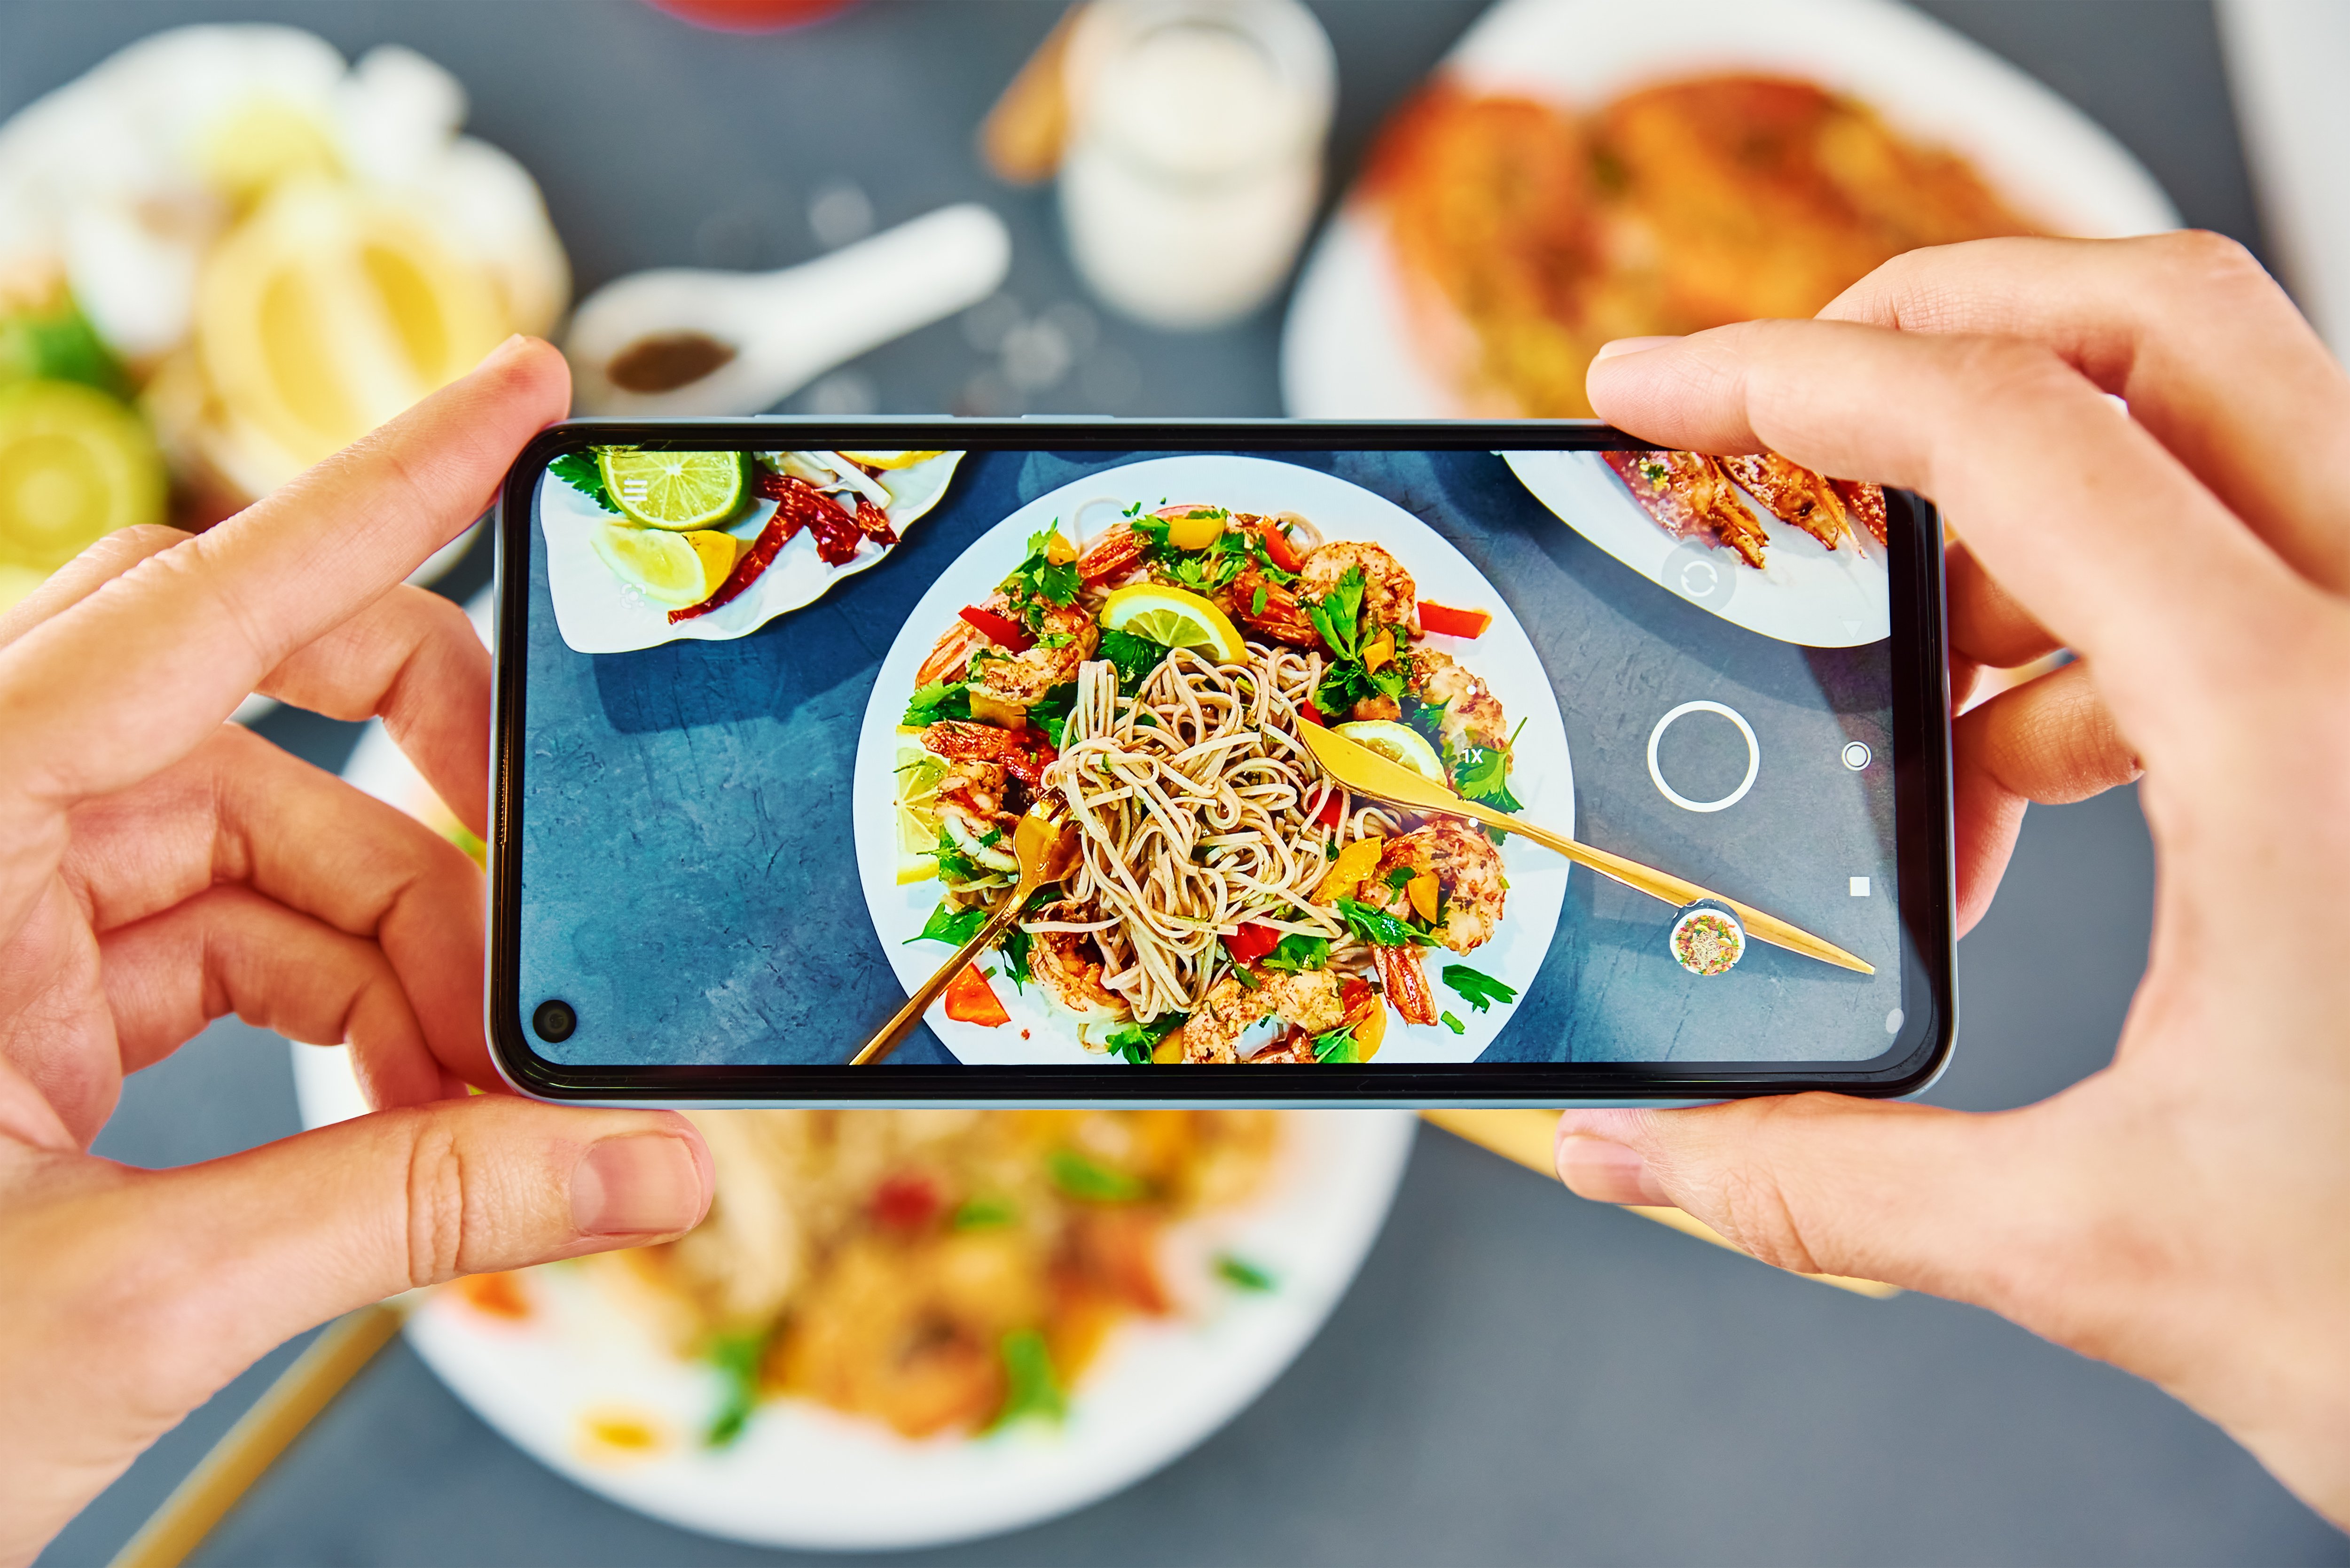 An individual taking a photo of stir fry noodles with a smartphone for restaurant social media marketing.